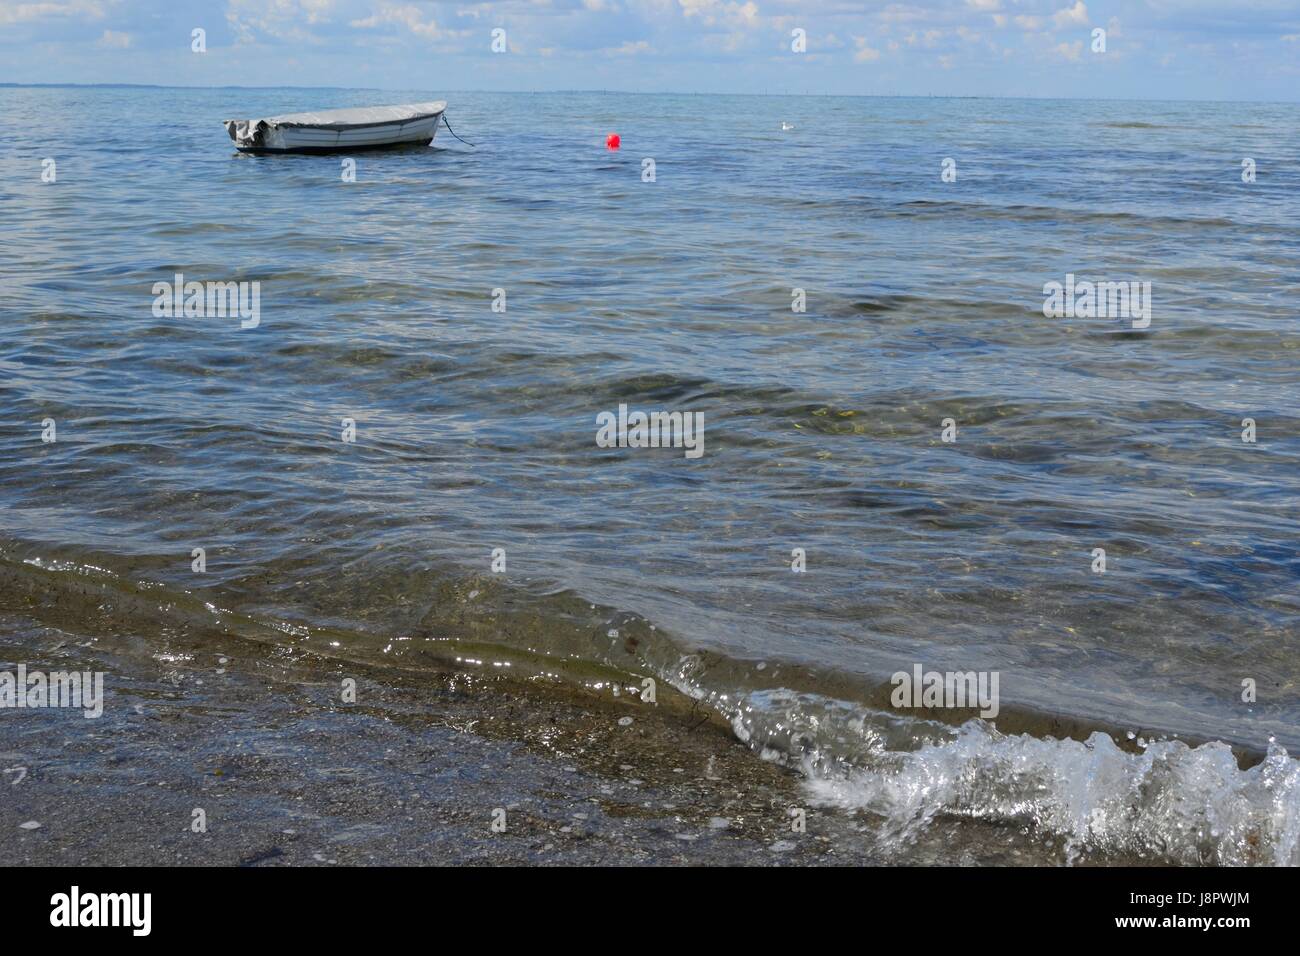 hard-made boat floating alone in the sea Stock Photo